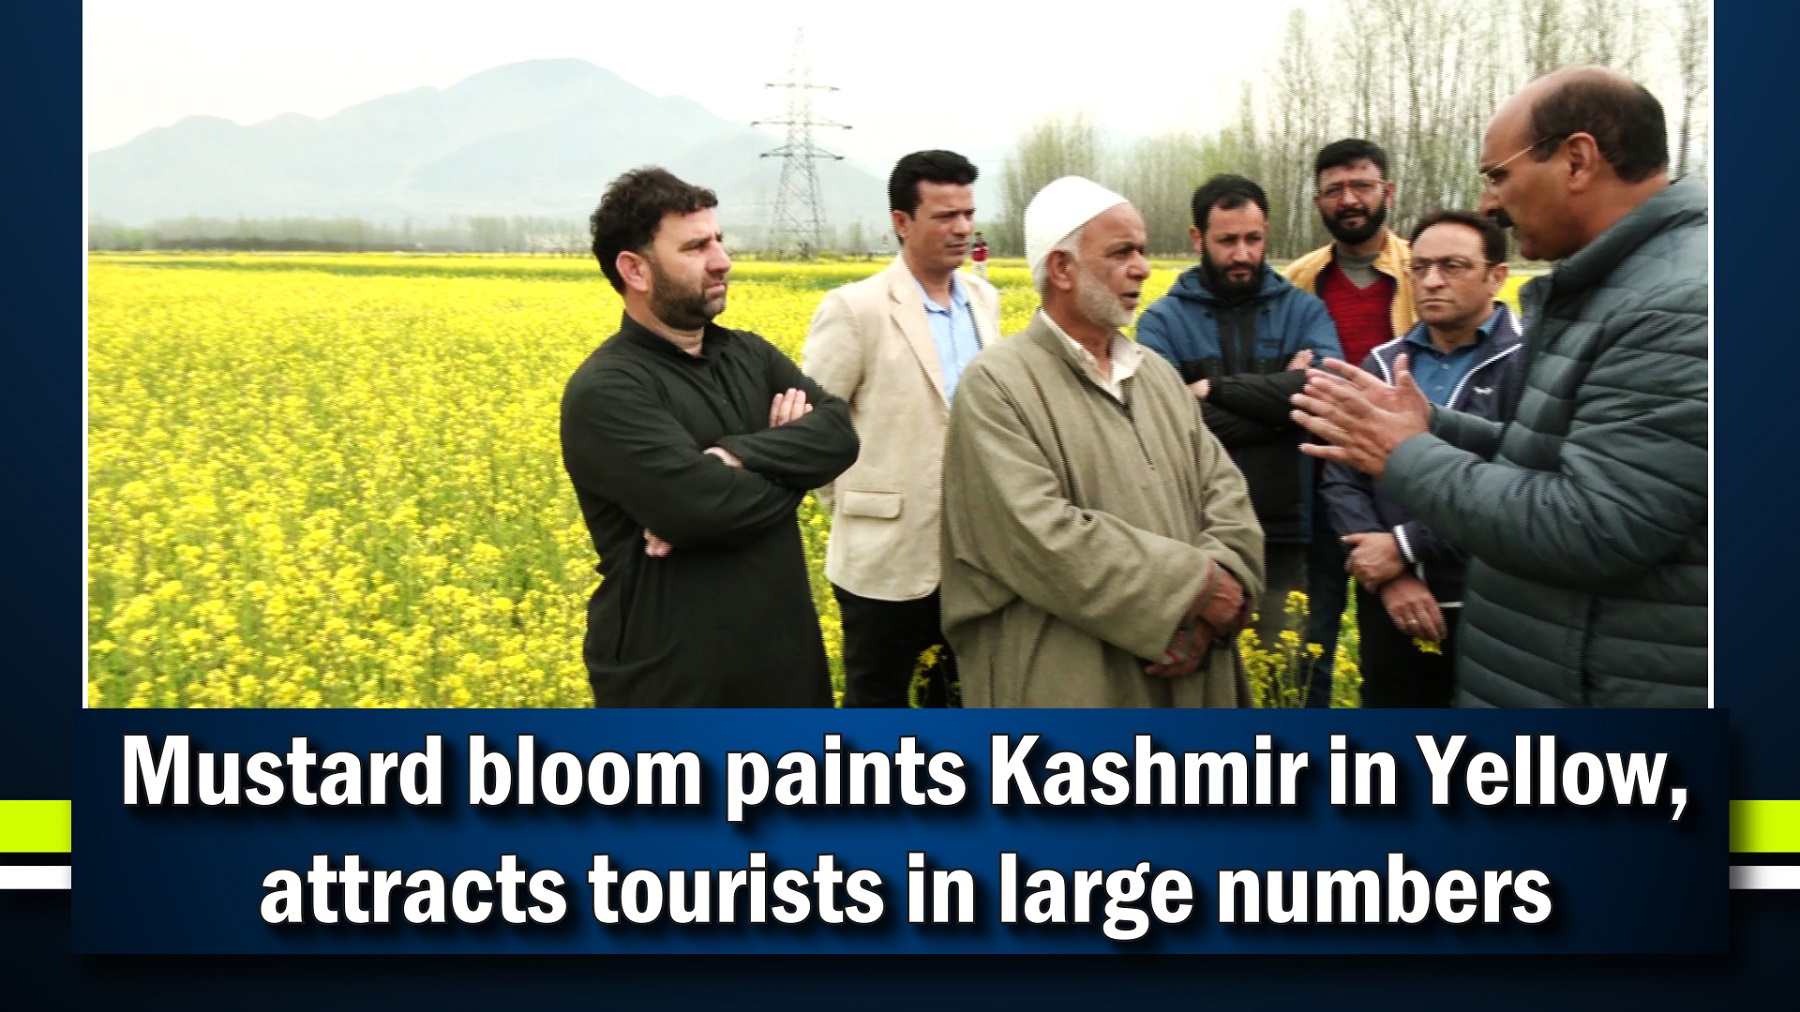 Mustard bloom paints Kashmir in Yellow, attracts tourists in large numbers